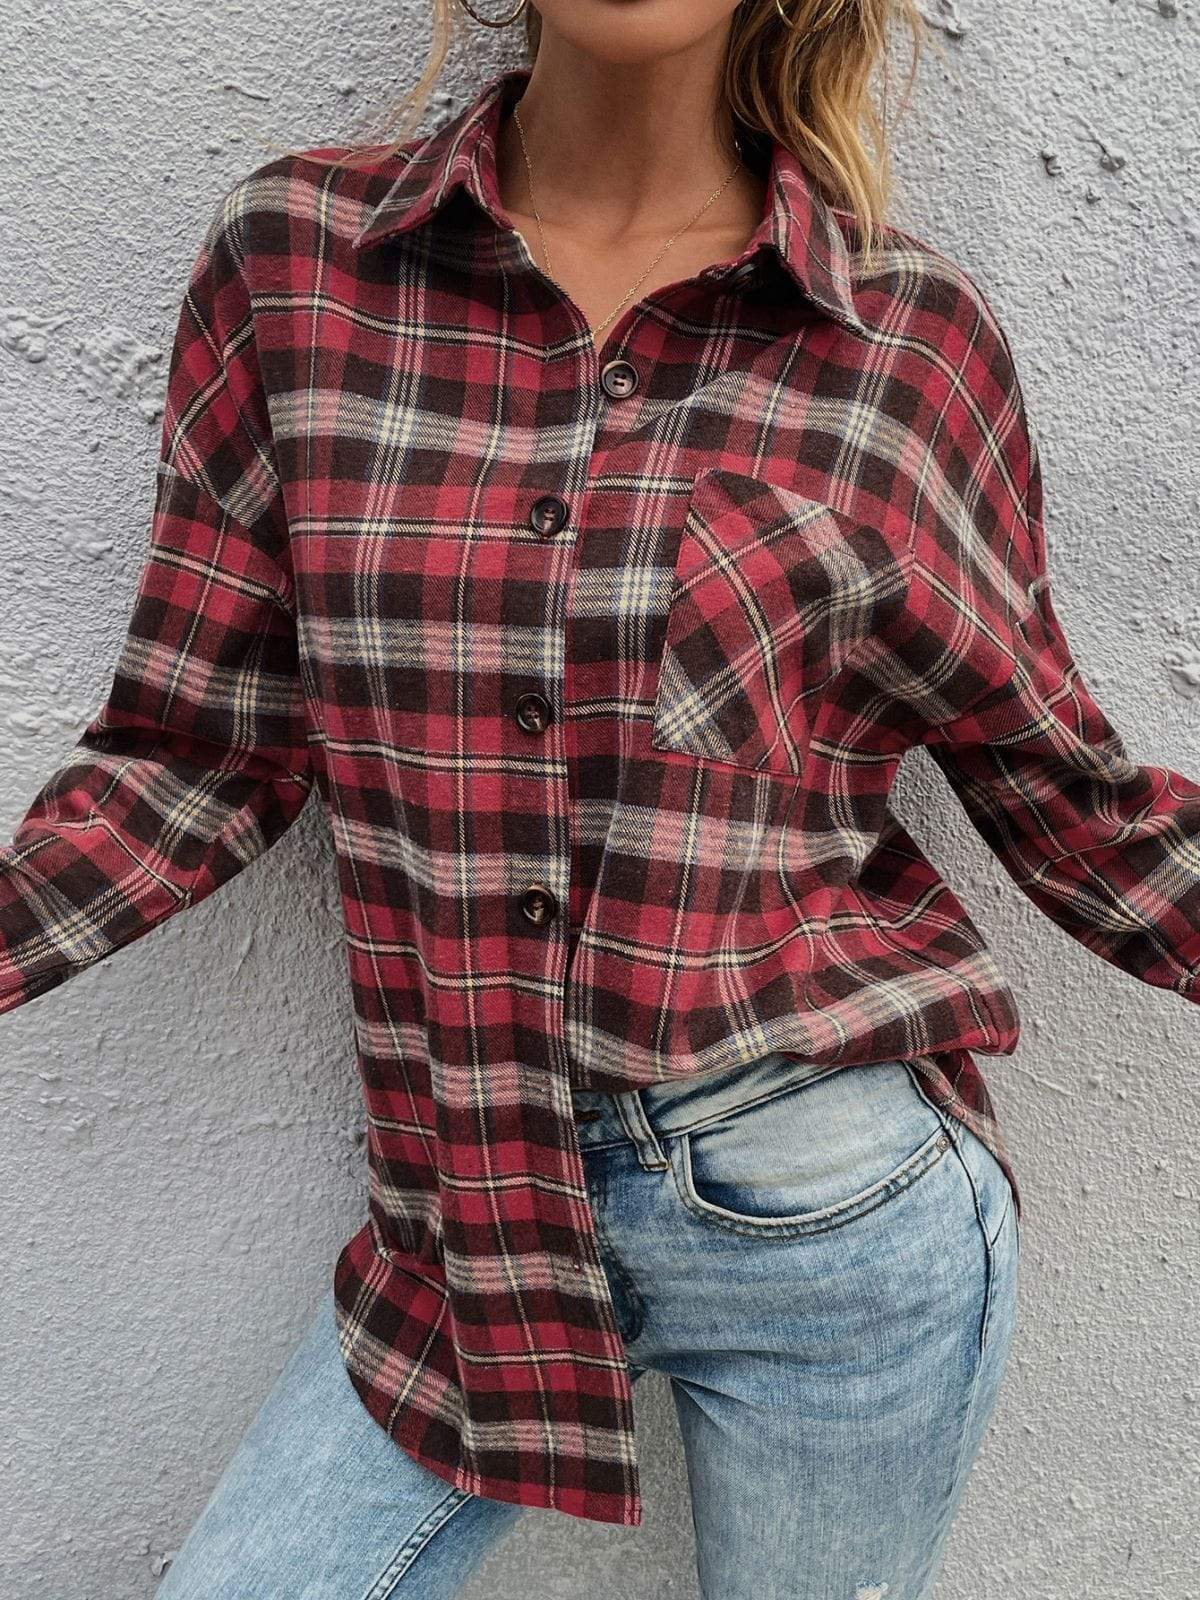 Anna-Kaci Plaid Button Up Flannel for Women with Shirt Pocket Collared Neck